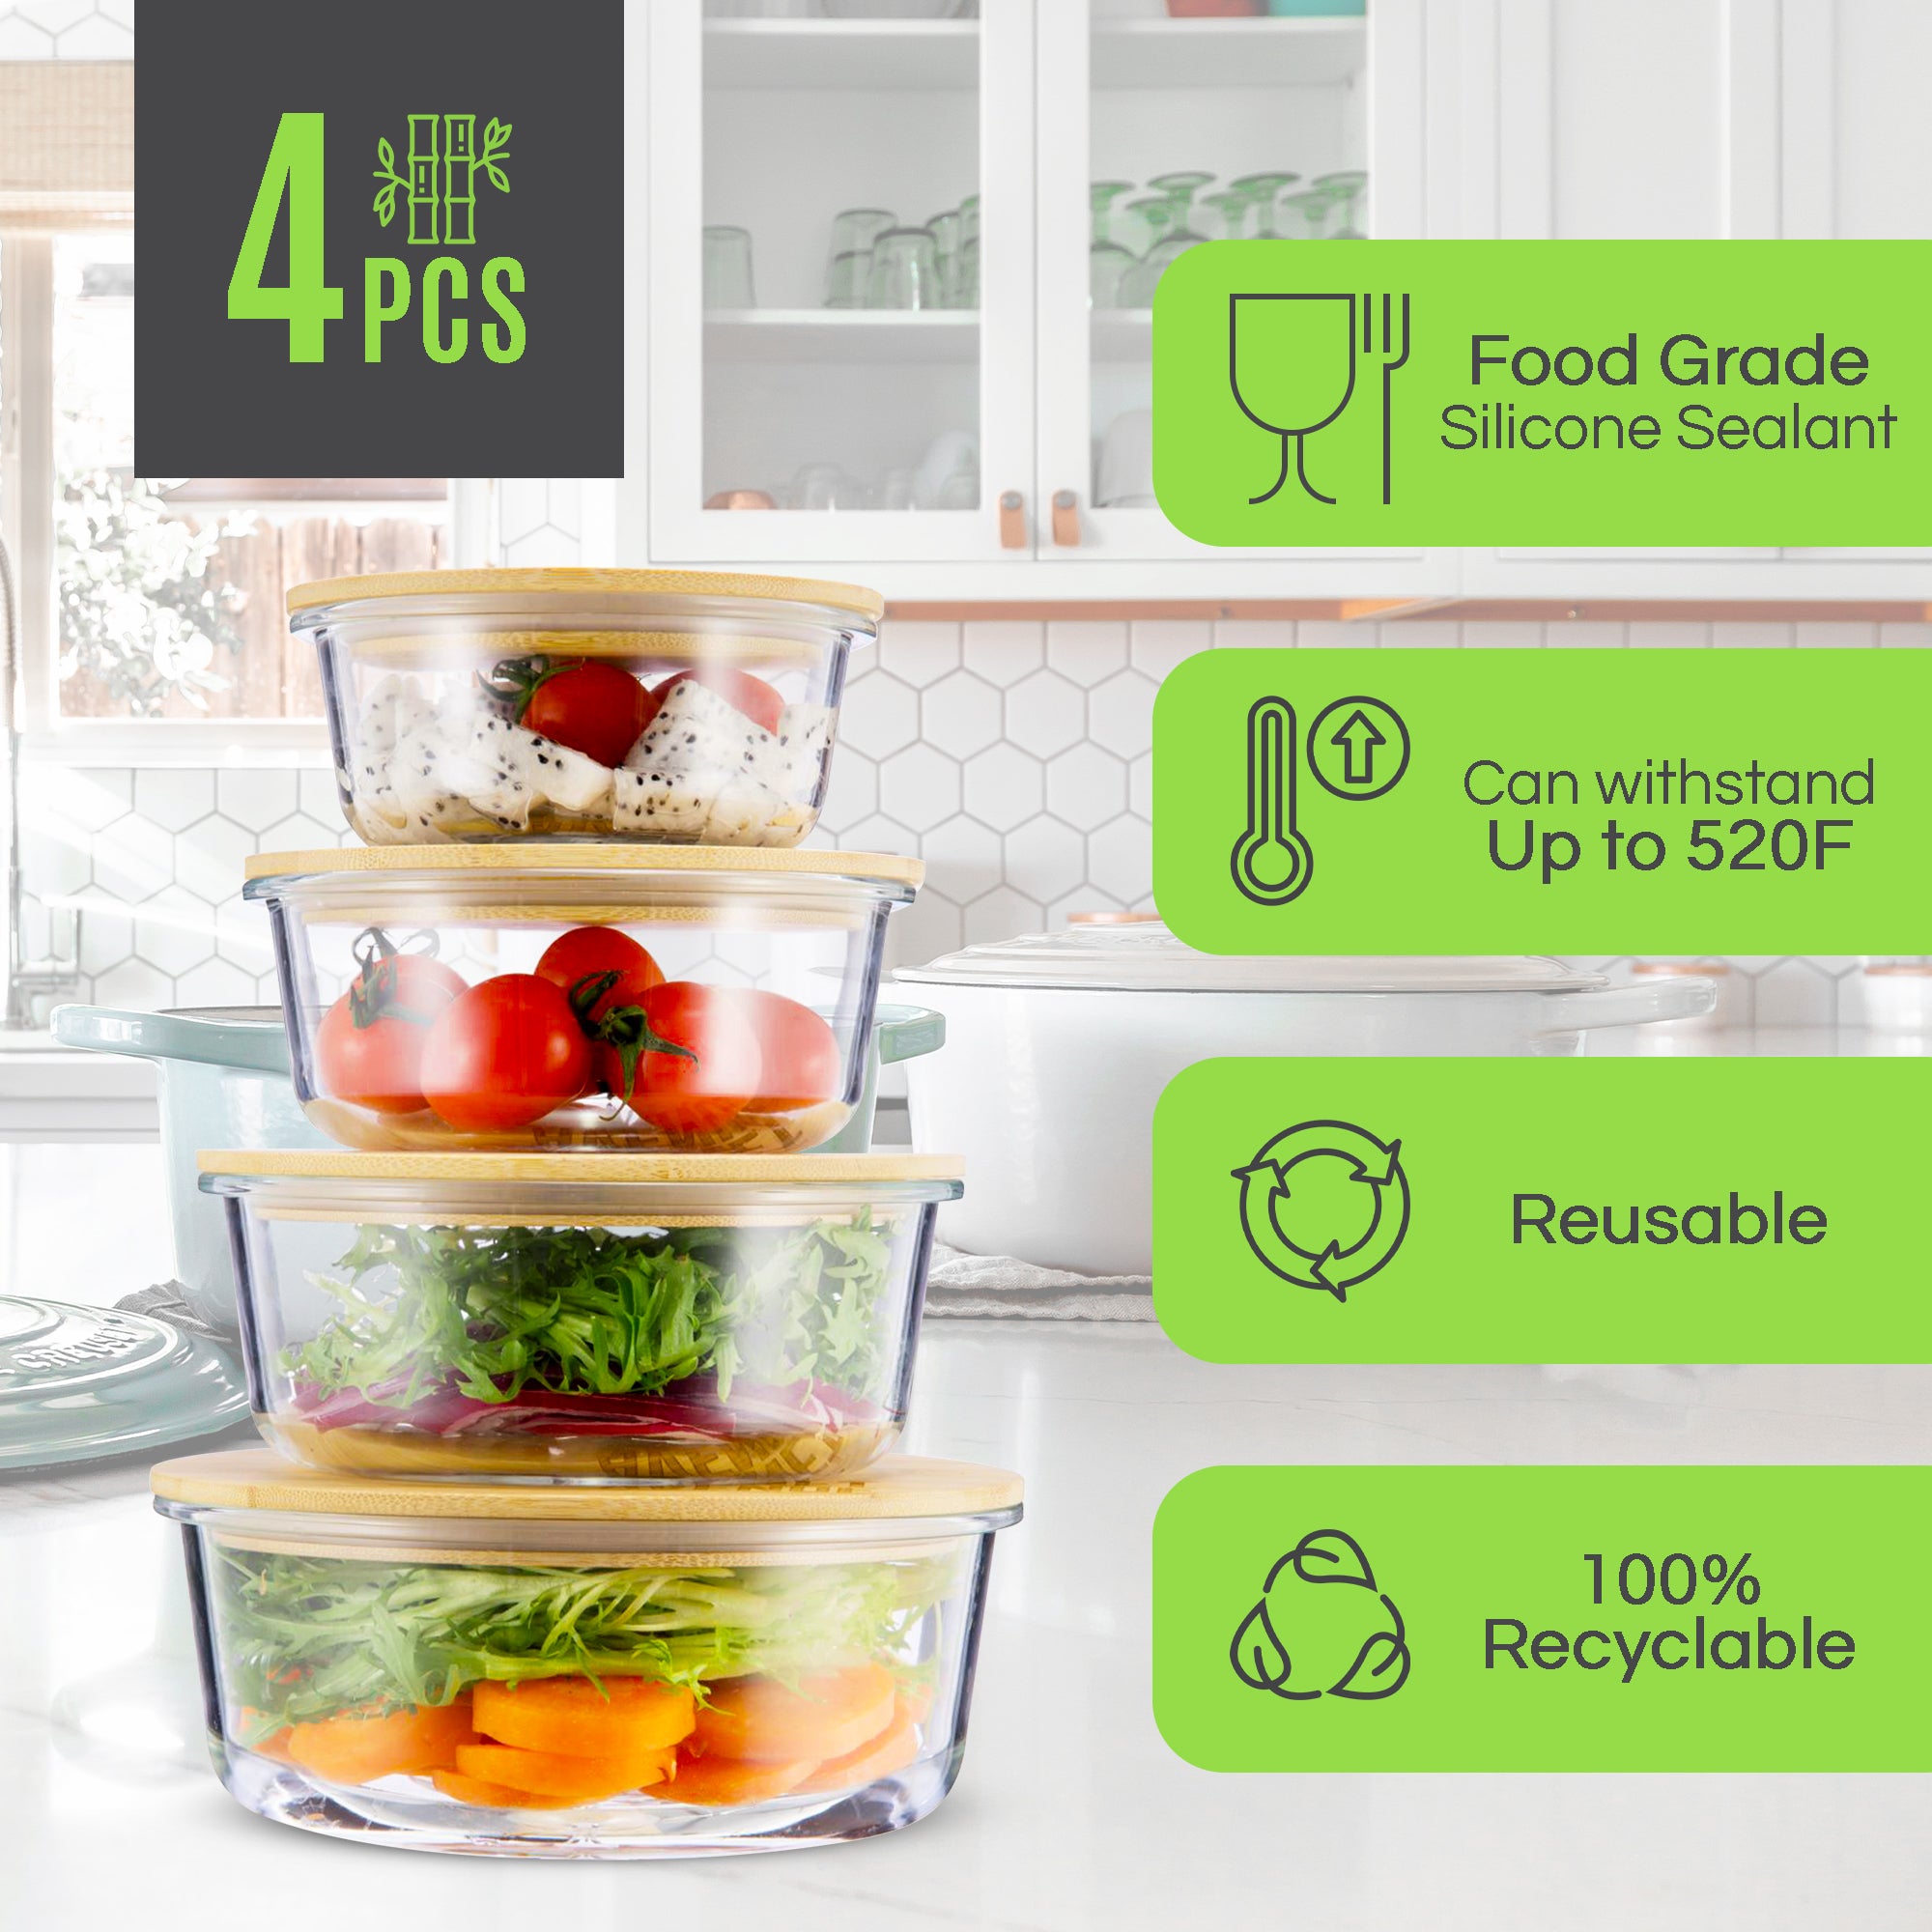 Yogik Set of 4 Rectangular Glass Food Storage Containers with Eco-Friendly Bamboo Lids - Plastic Free - Phthalate Free - Lfgb Approved FDA Approved 